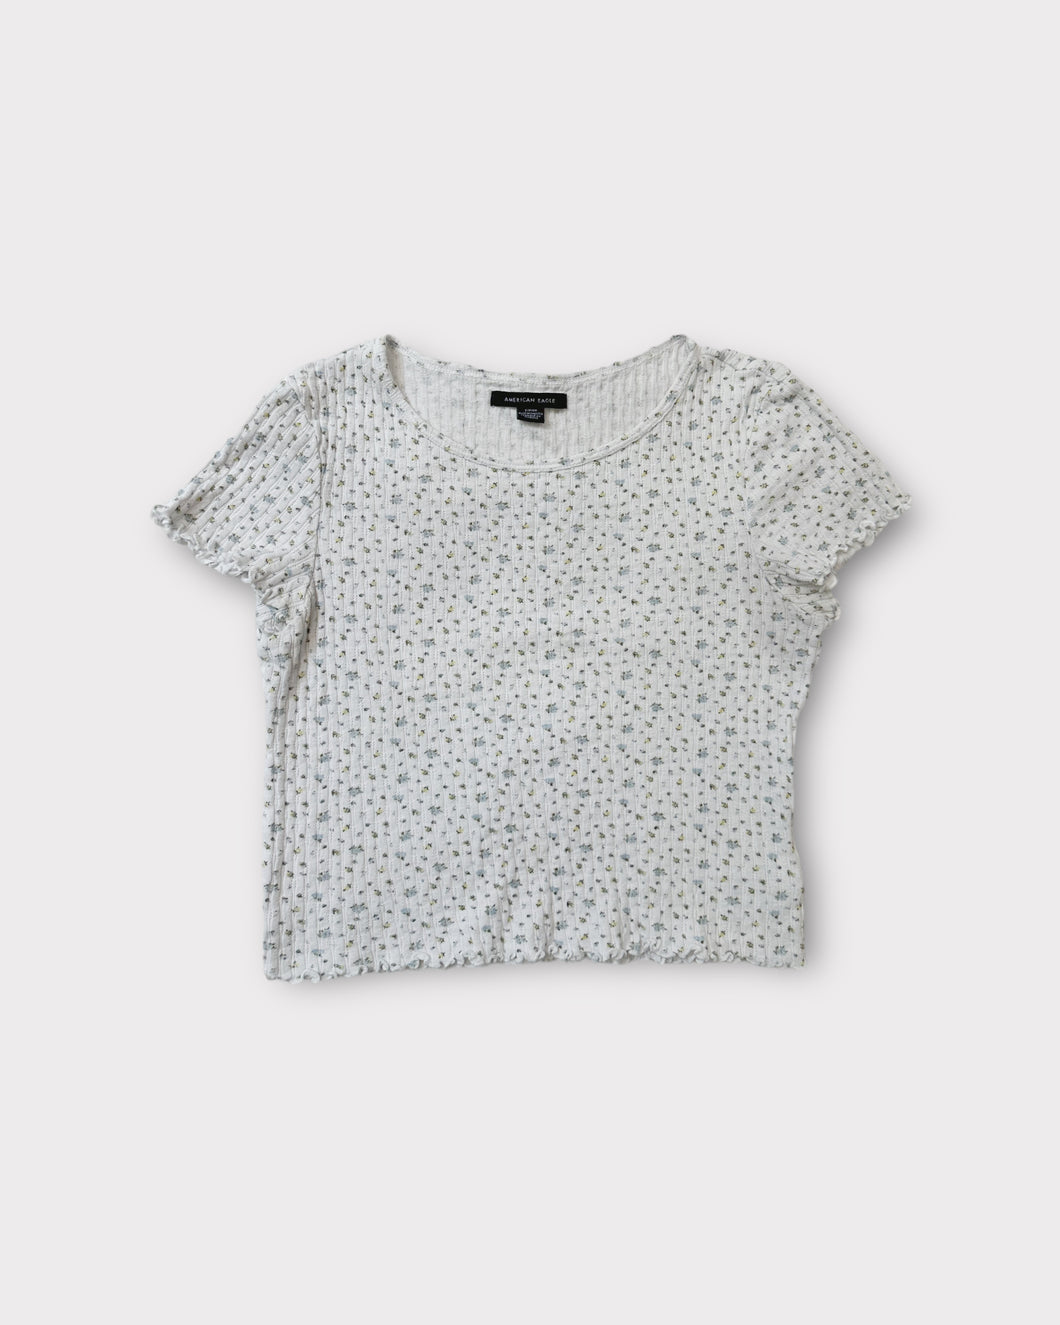 American Eagle Waffle Print Floral Baby Tee (S)